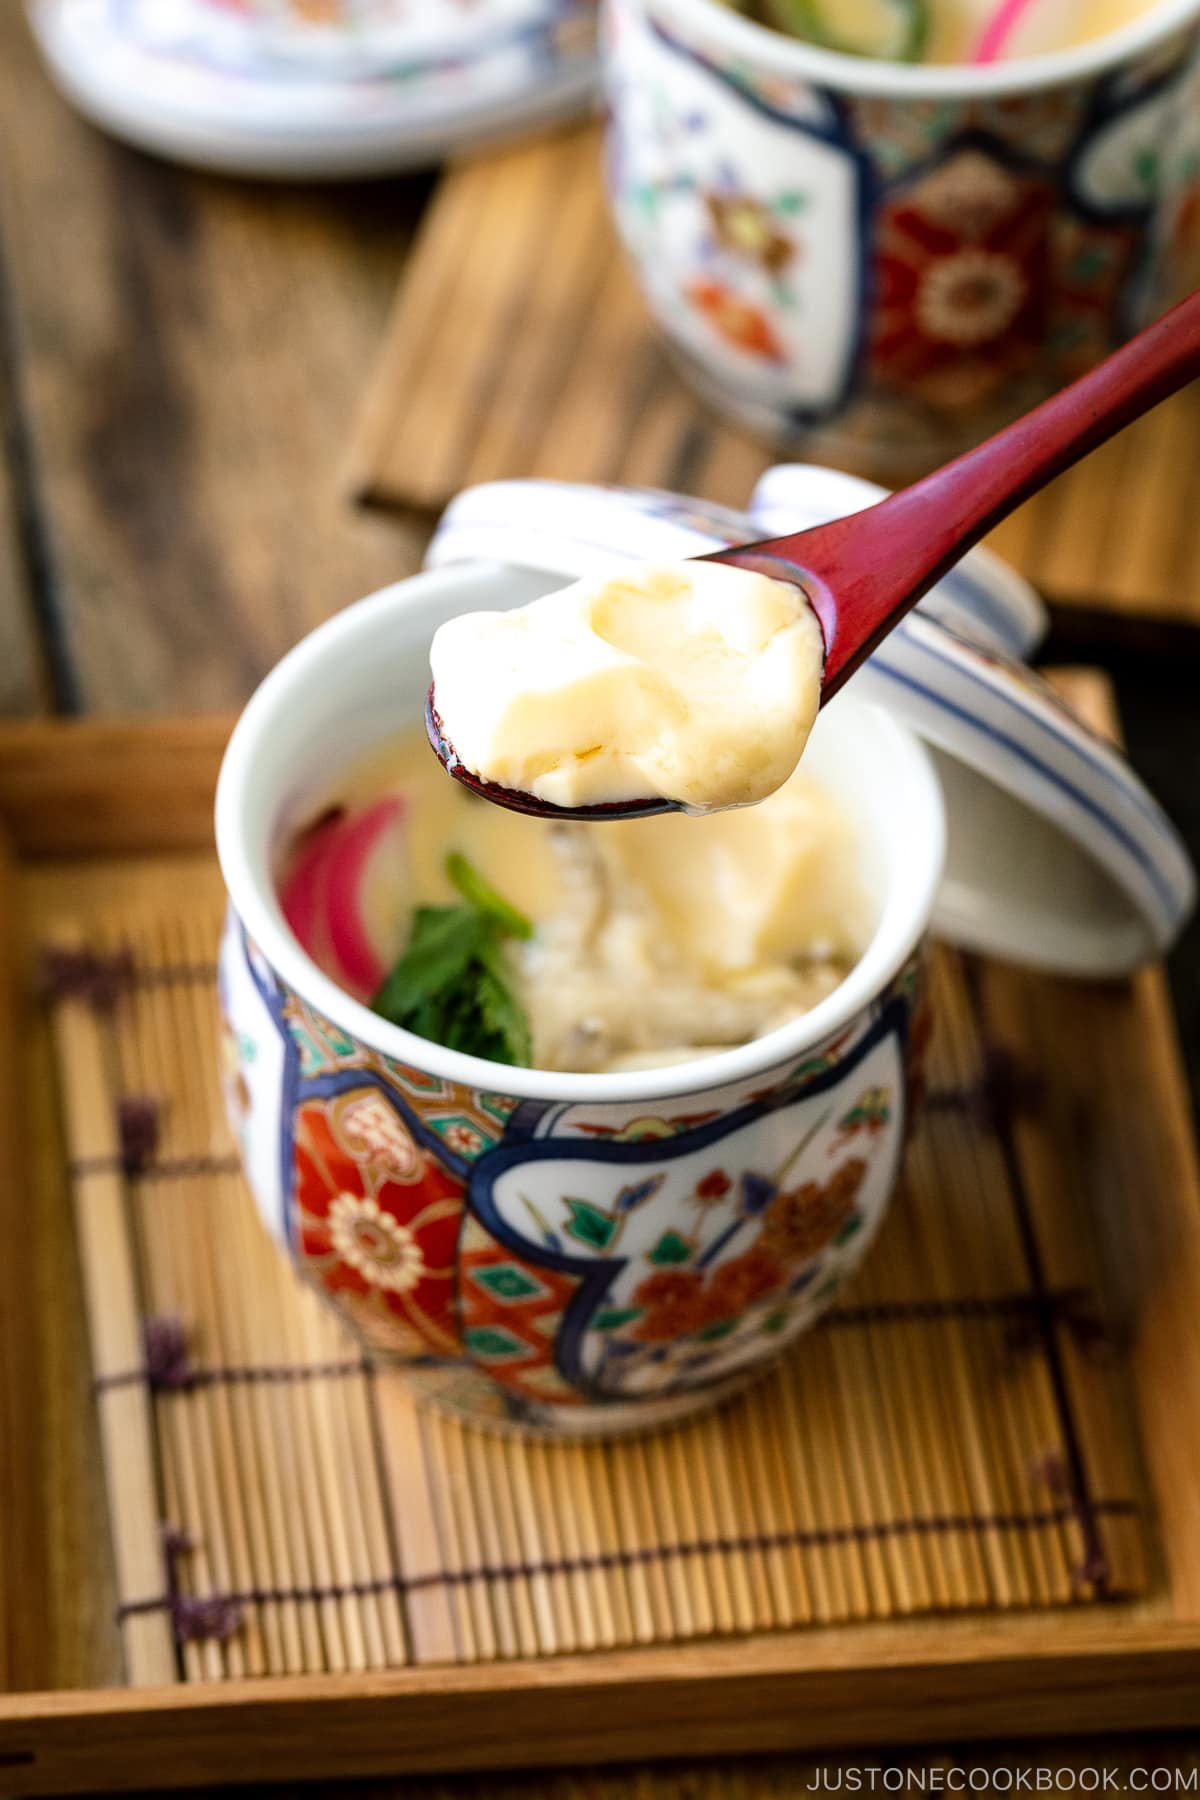 A special Japanese chawanmushi cup containing savory steamed custard filled with kamaboko fish cake, chicken, and mushroom.